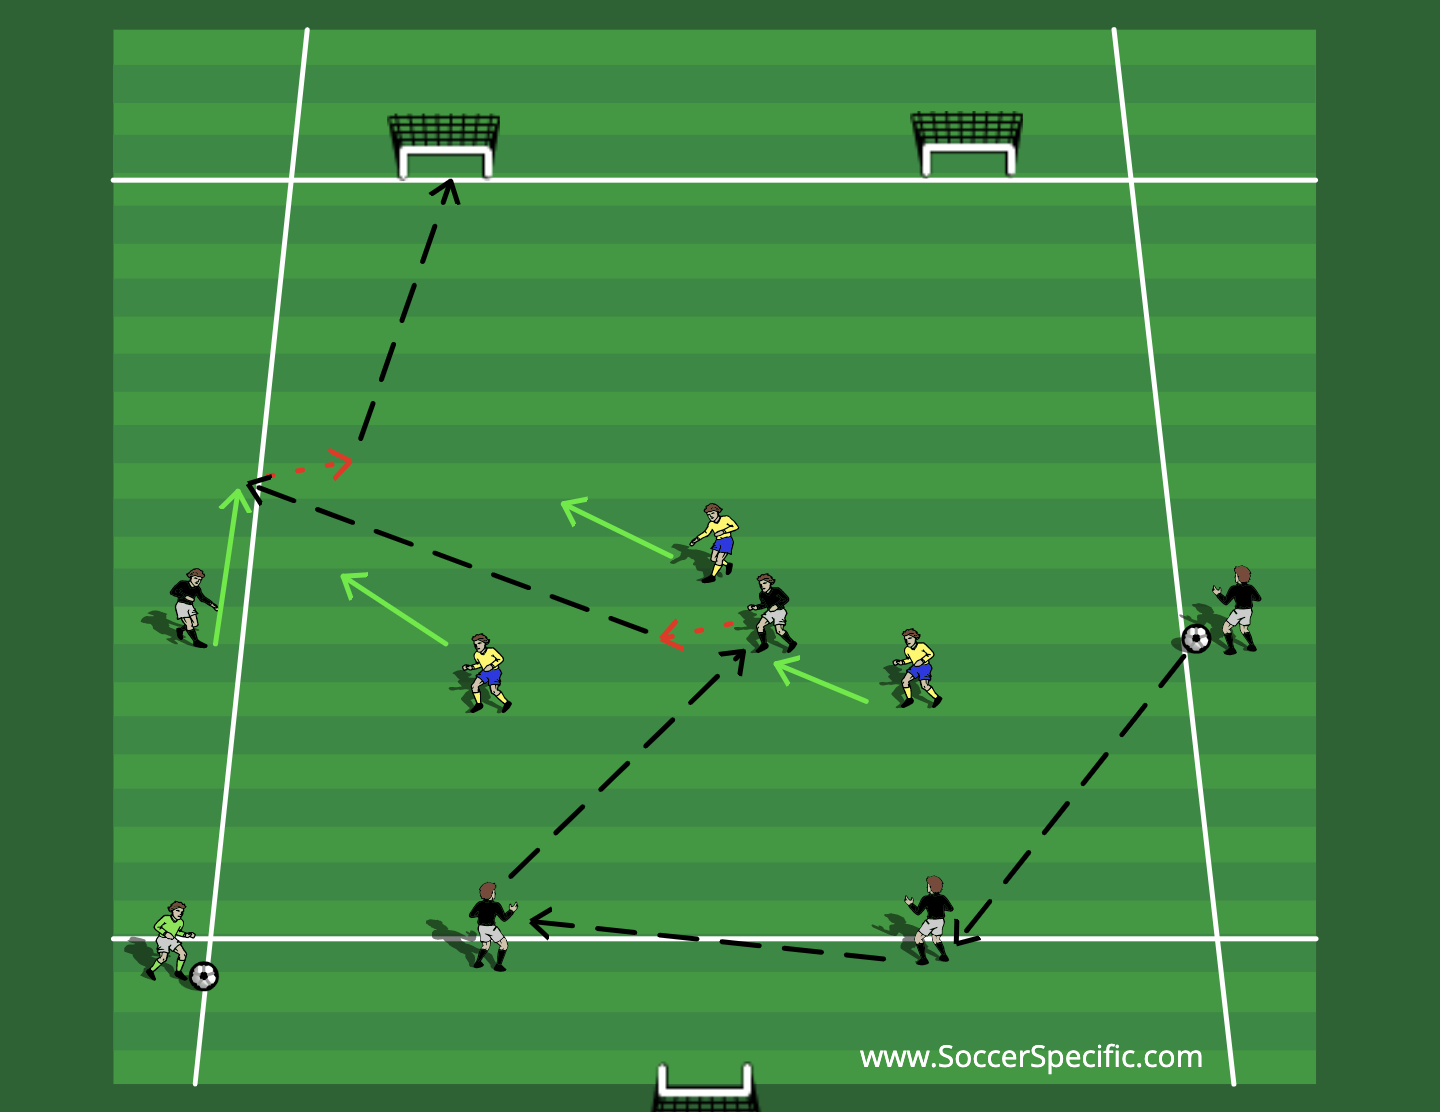 Building through the Midfield 2 | SoccerSpecific.com